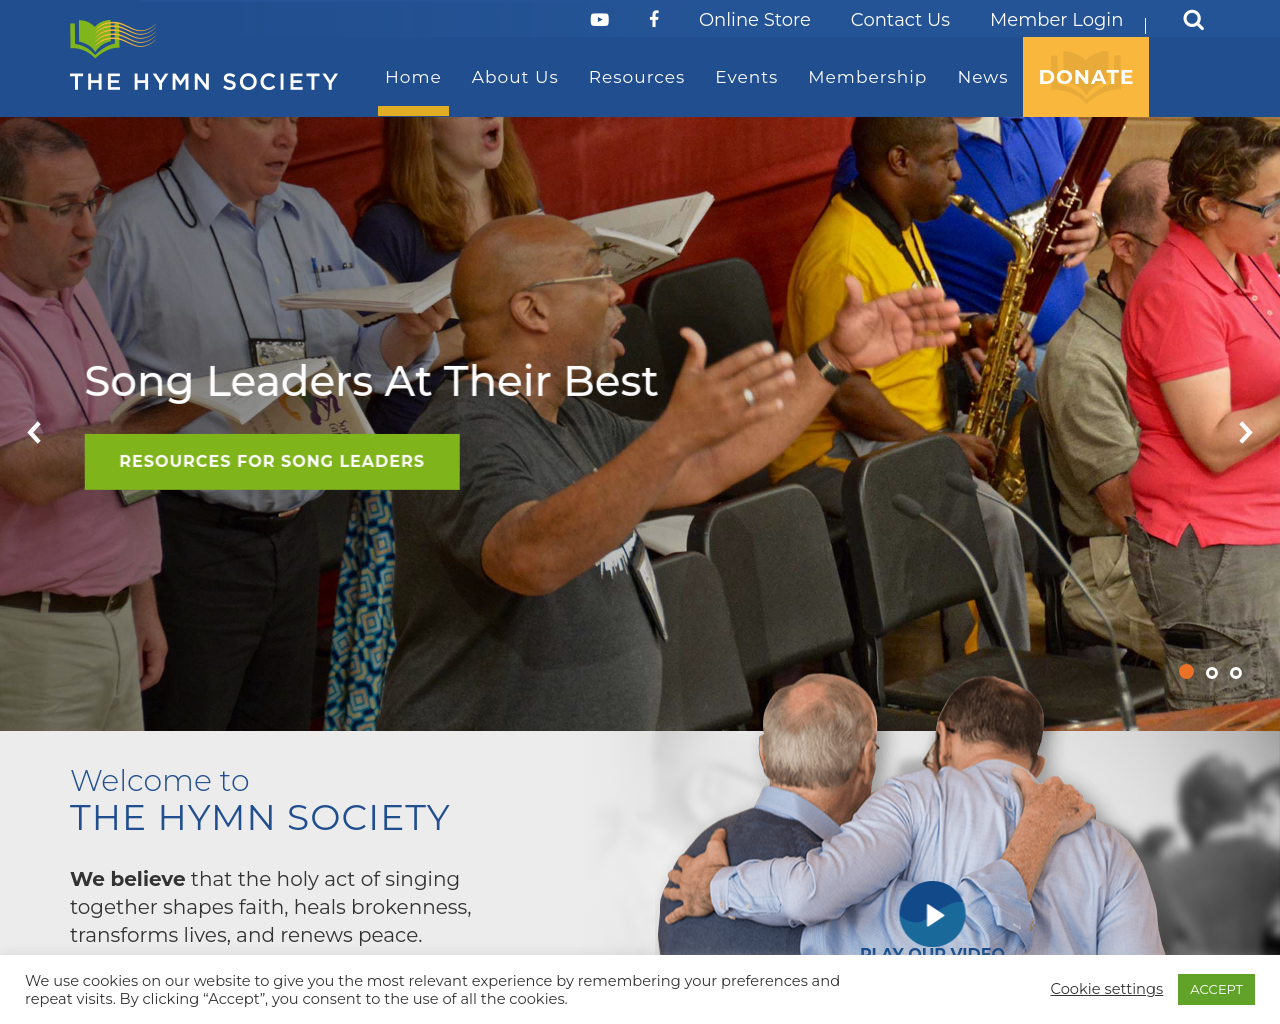 thehymnsociety.org